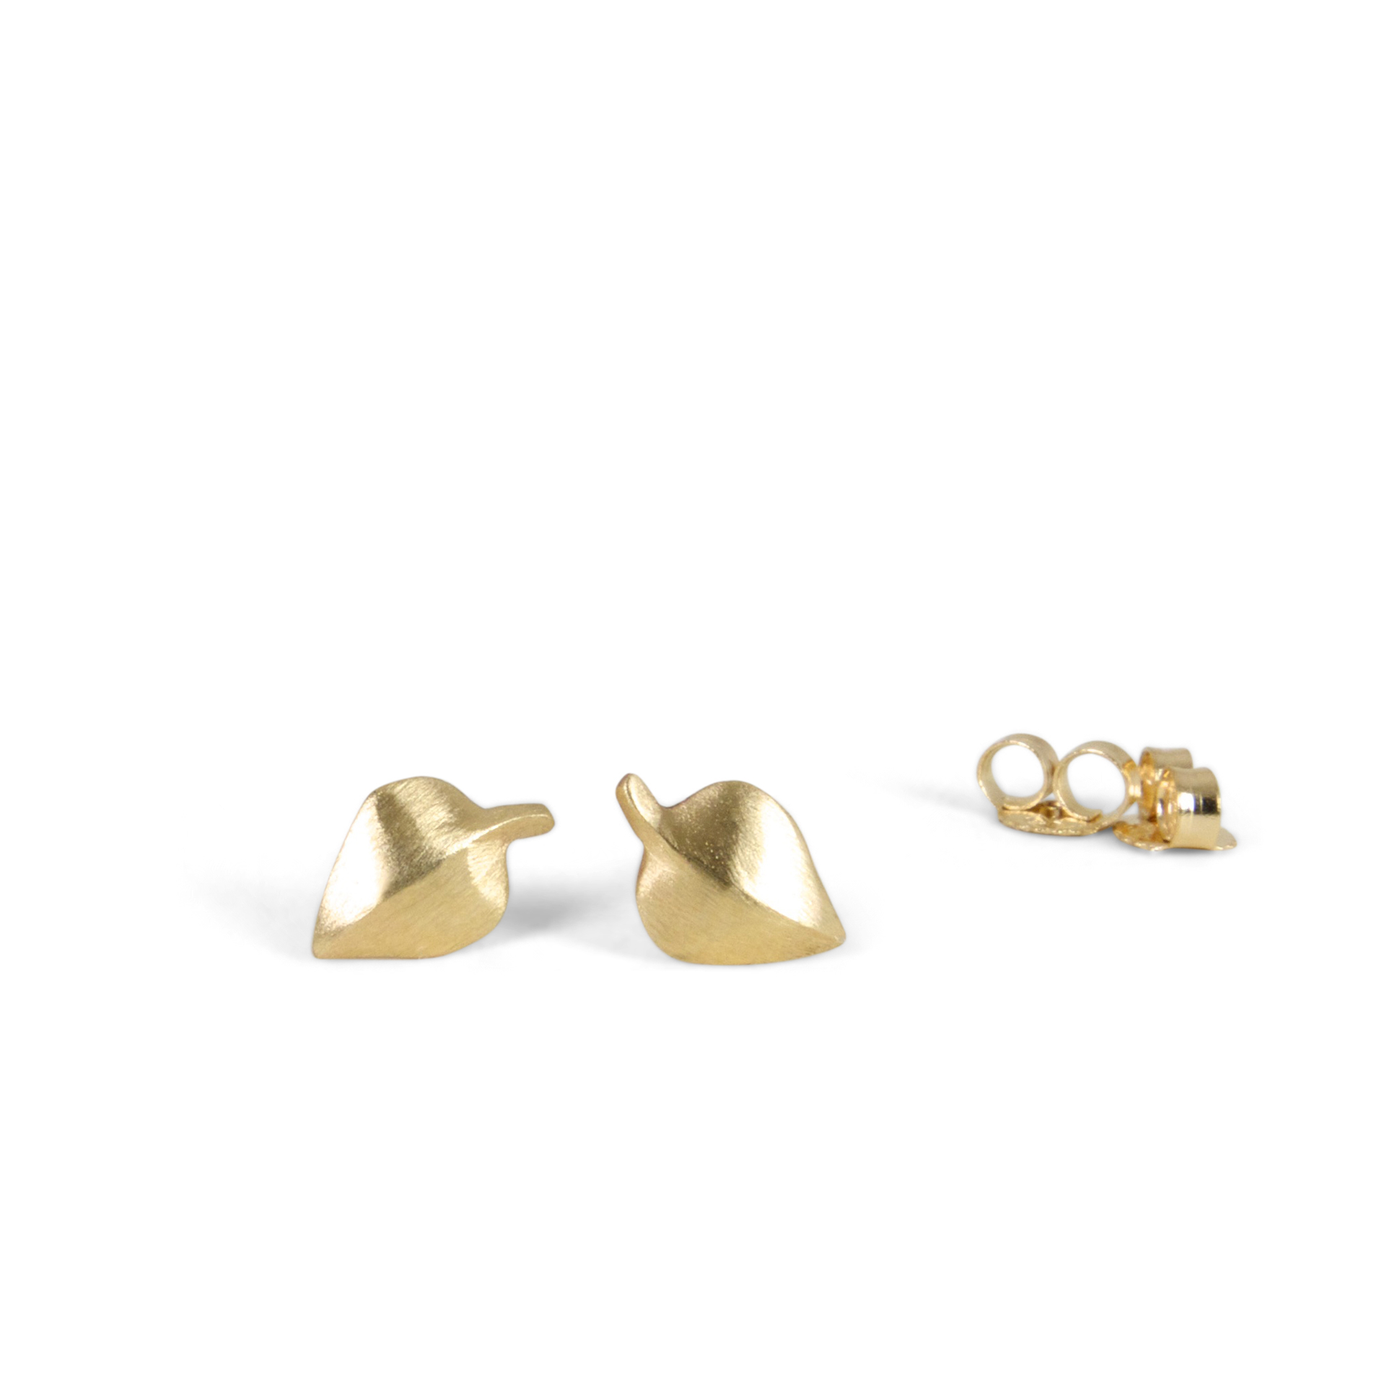 Yellow Gold Aspen Stud Earrings on a white background by Corey Egan